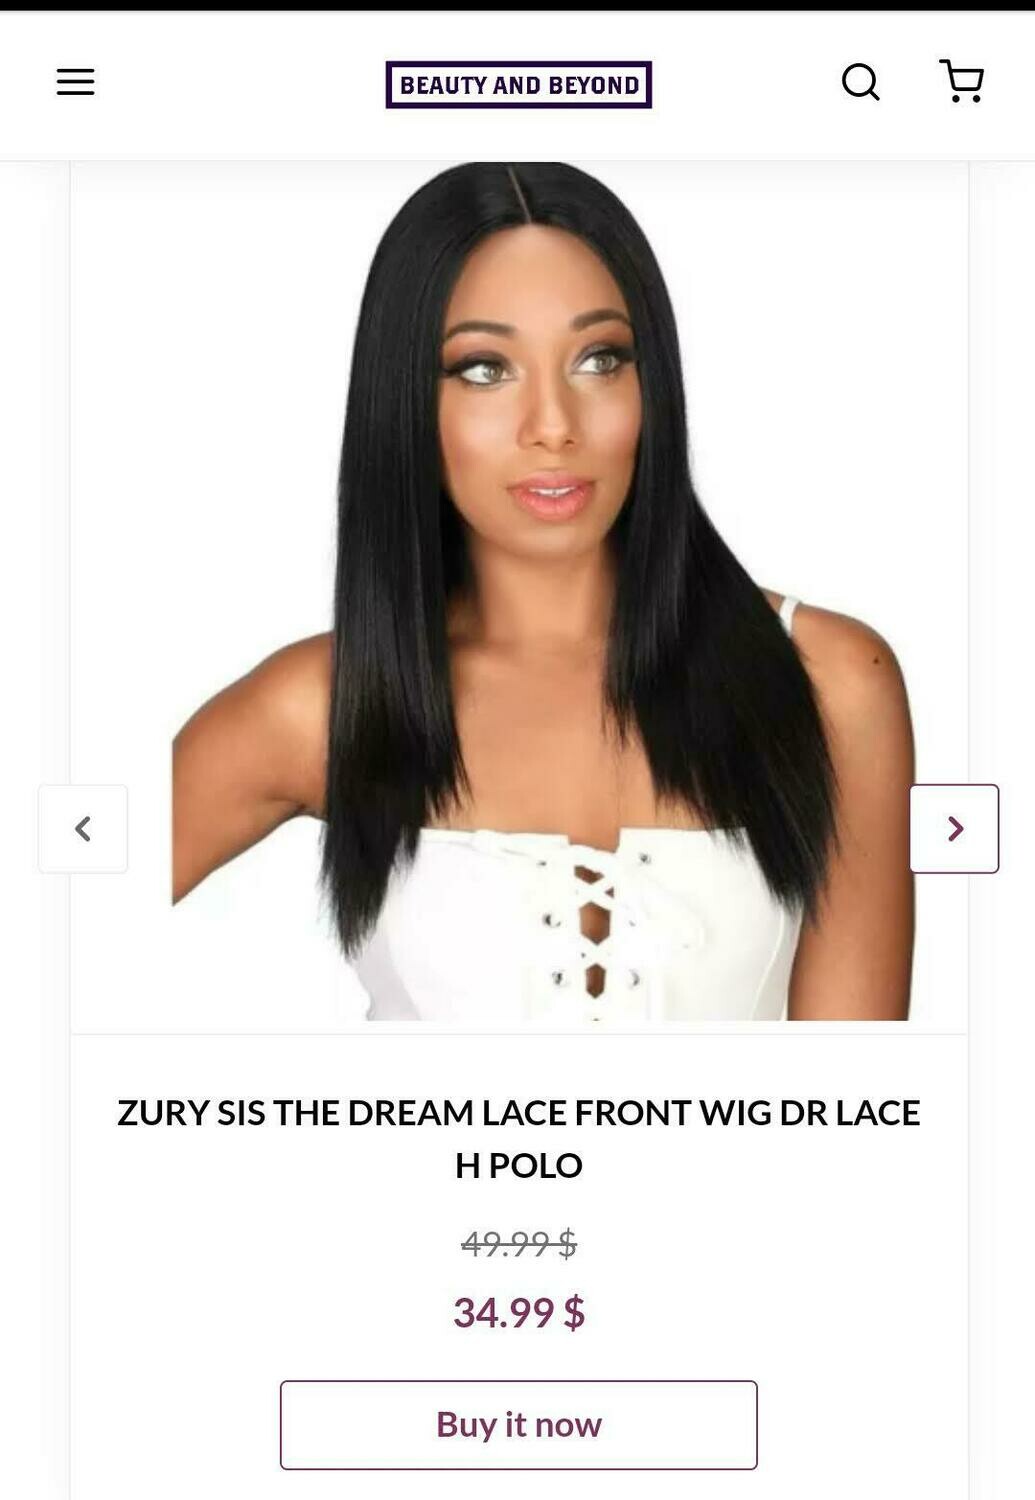 Zury Sis The Dream Lace Front Wig DR LACE POLO